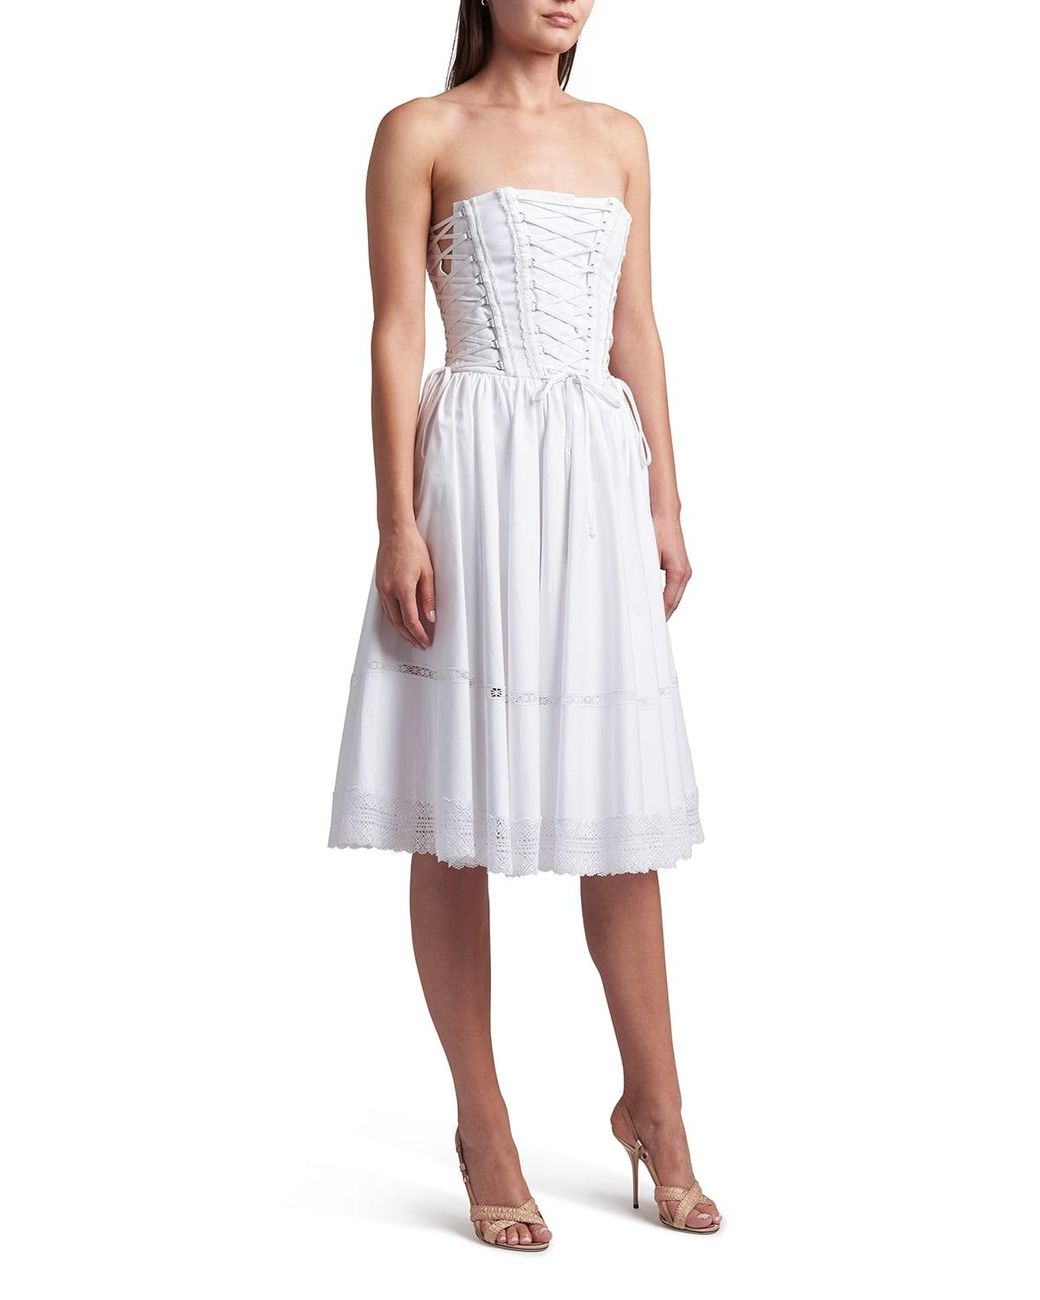 Dolce & Gabbana Lace-up Corset Dress W/ Lace Trim in White | Lyst